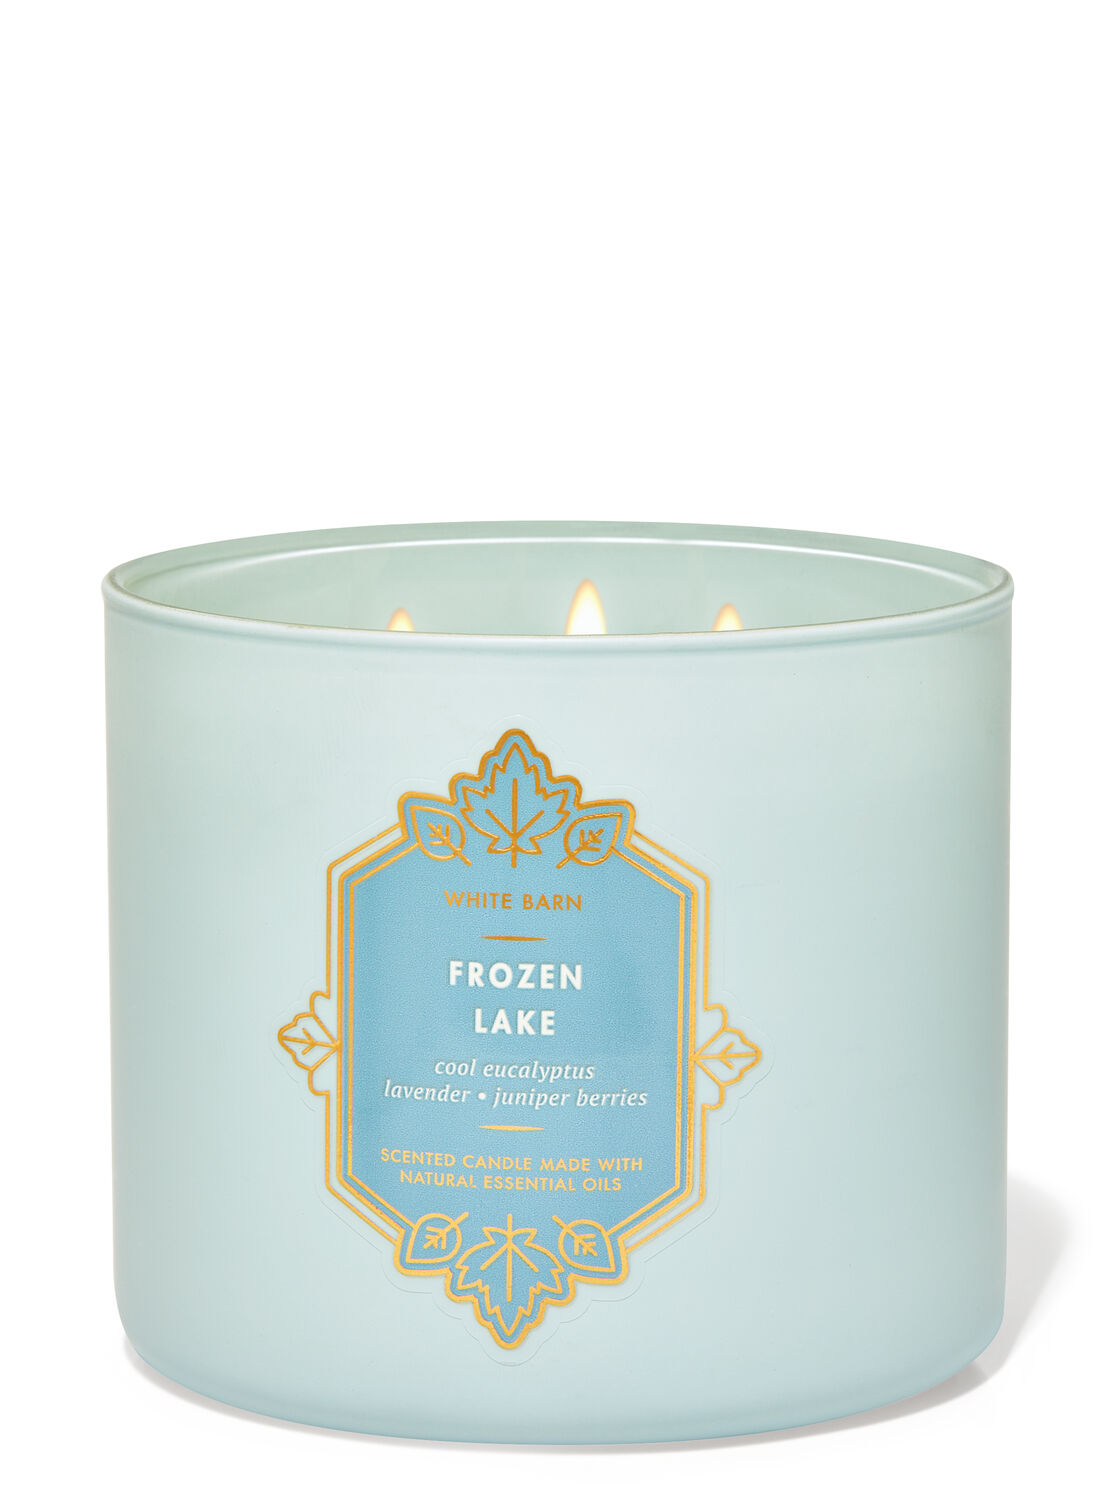 1 Bath Body Works FROZEN LAKE ICELAND Large 3-Wick Scented Candle 14.5 oz 